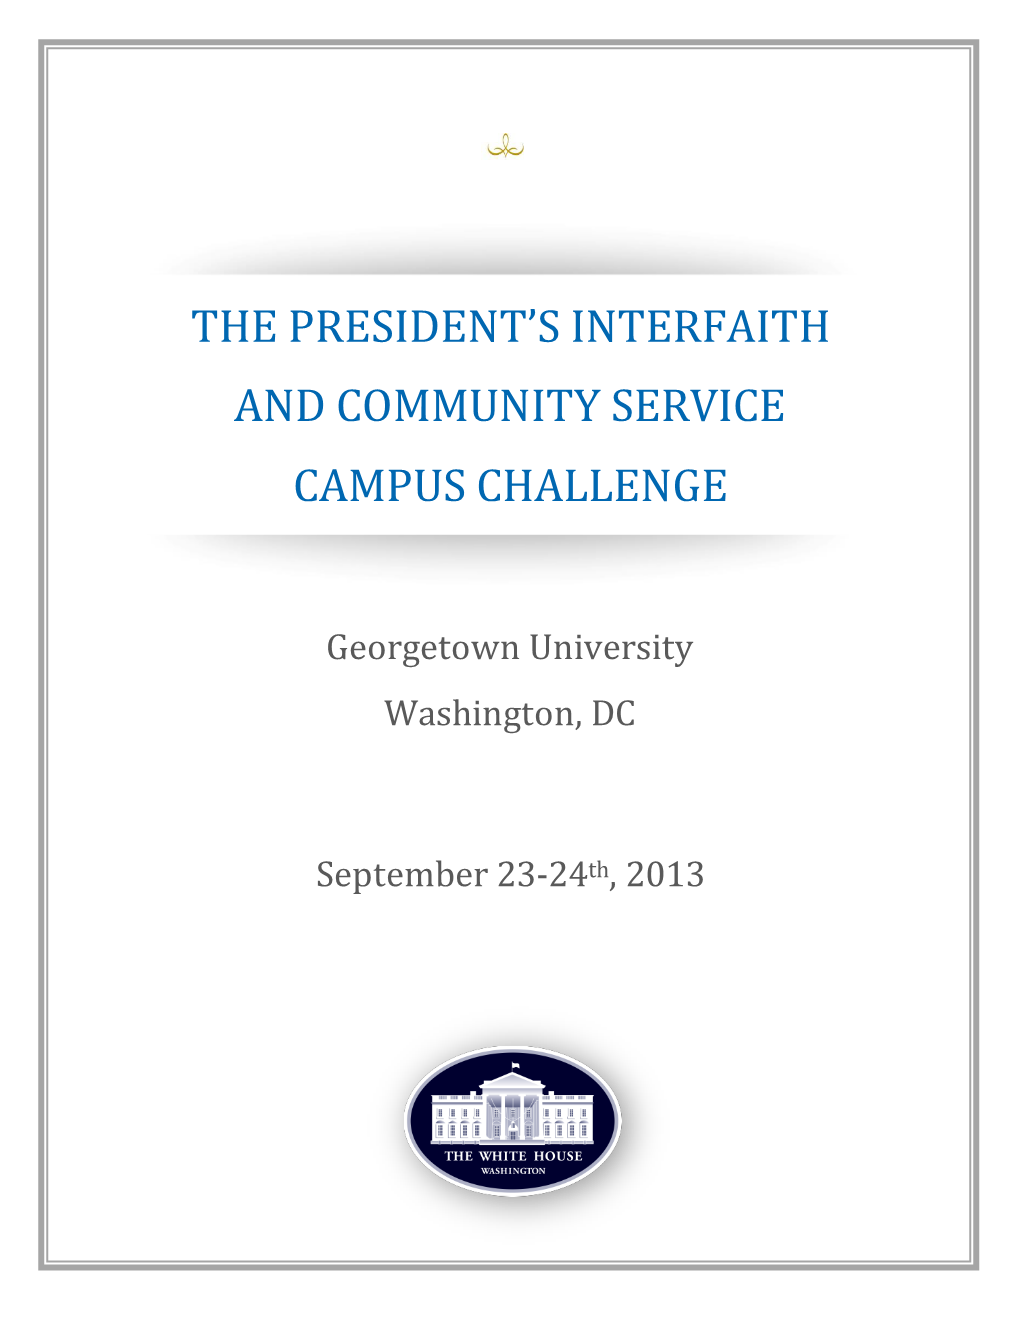 The President's Interfaith and Community Service Campus